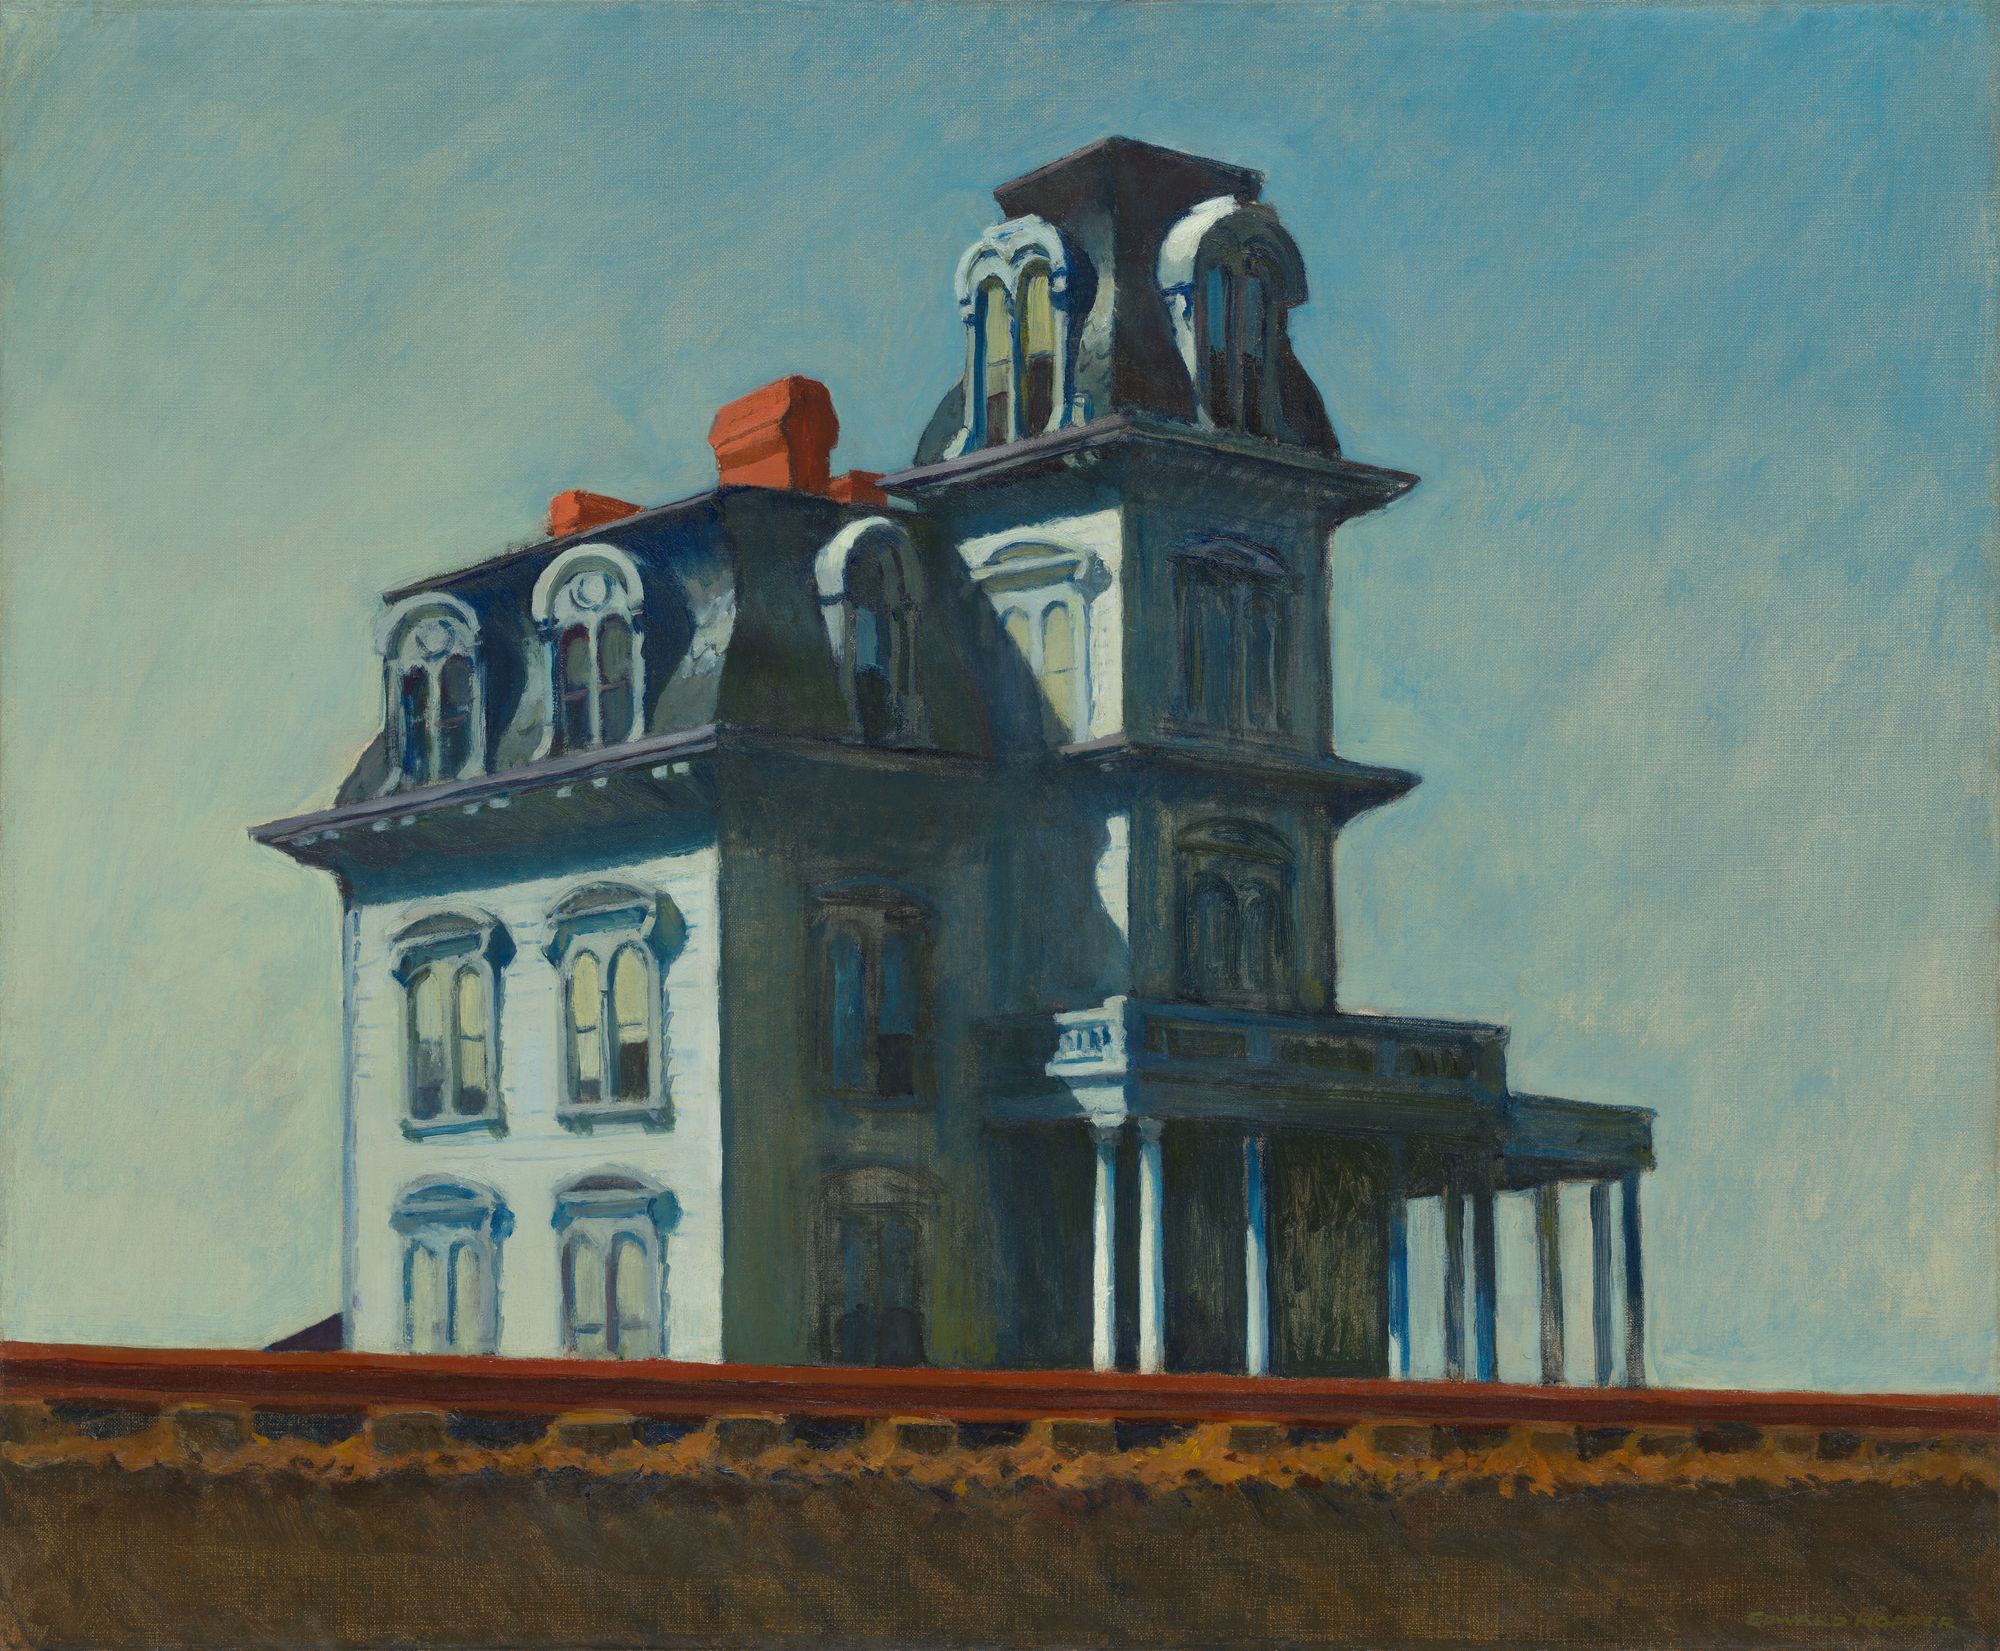 House by the Railroad by Edward Hopper - 1925 - 61 x 73.7 cm Museum of Modern Art